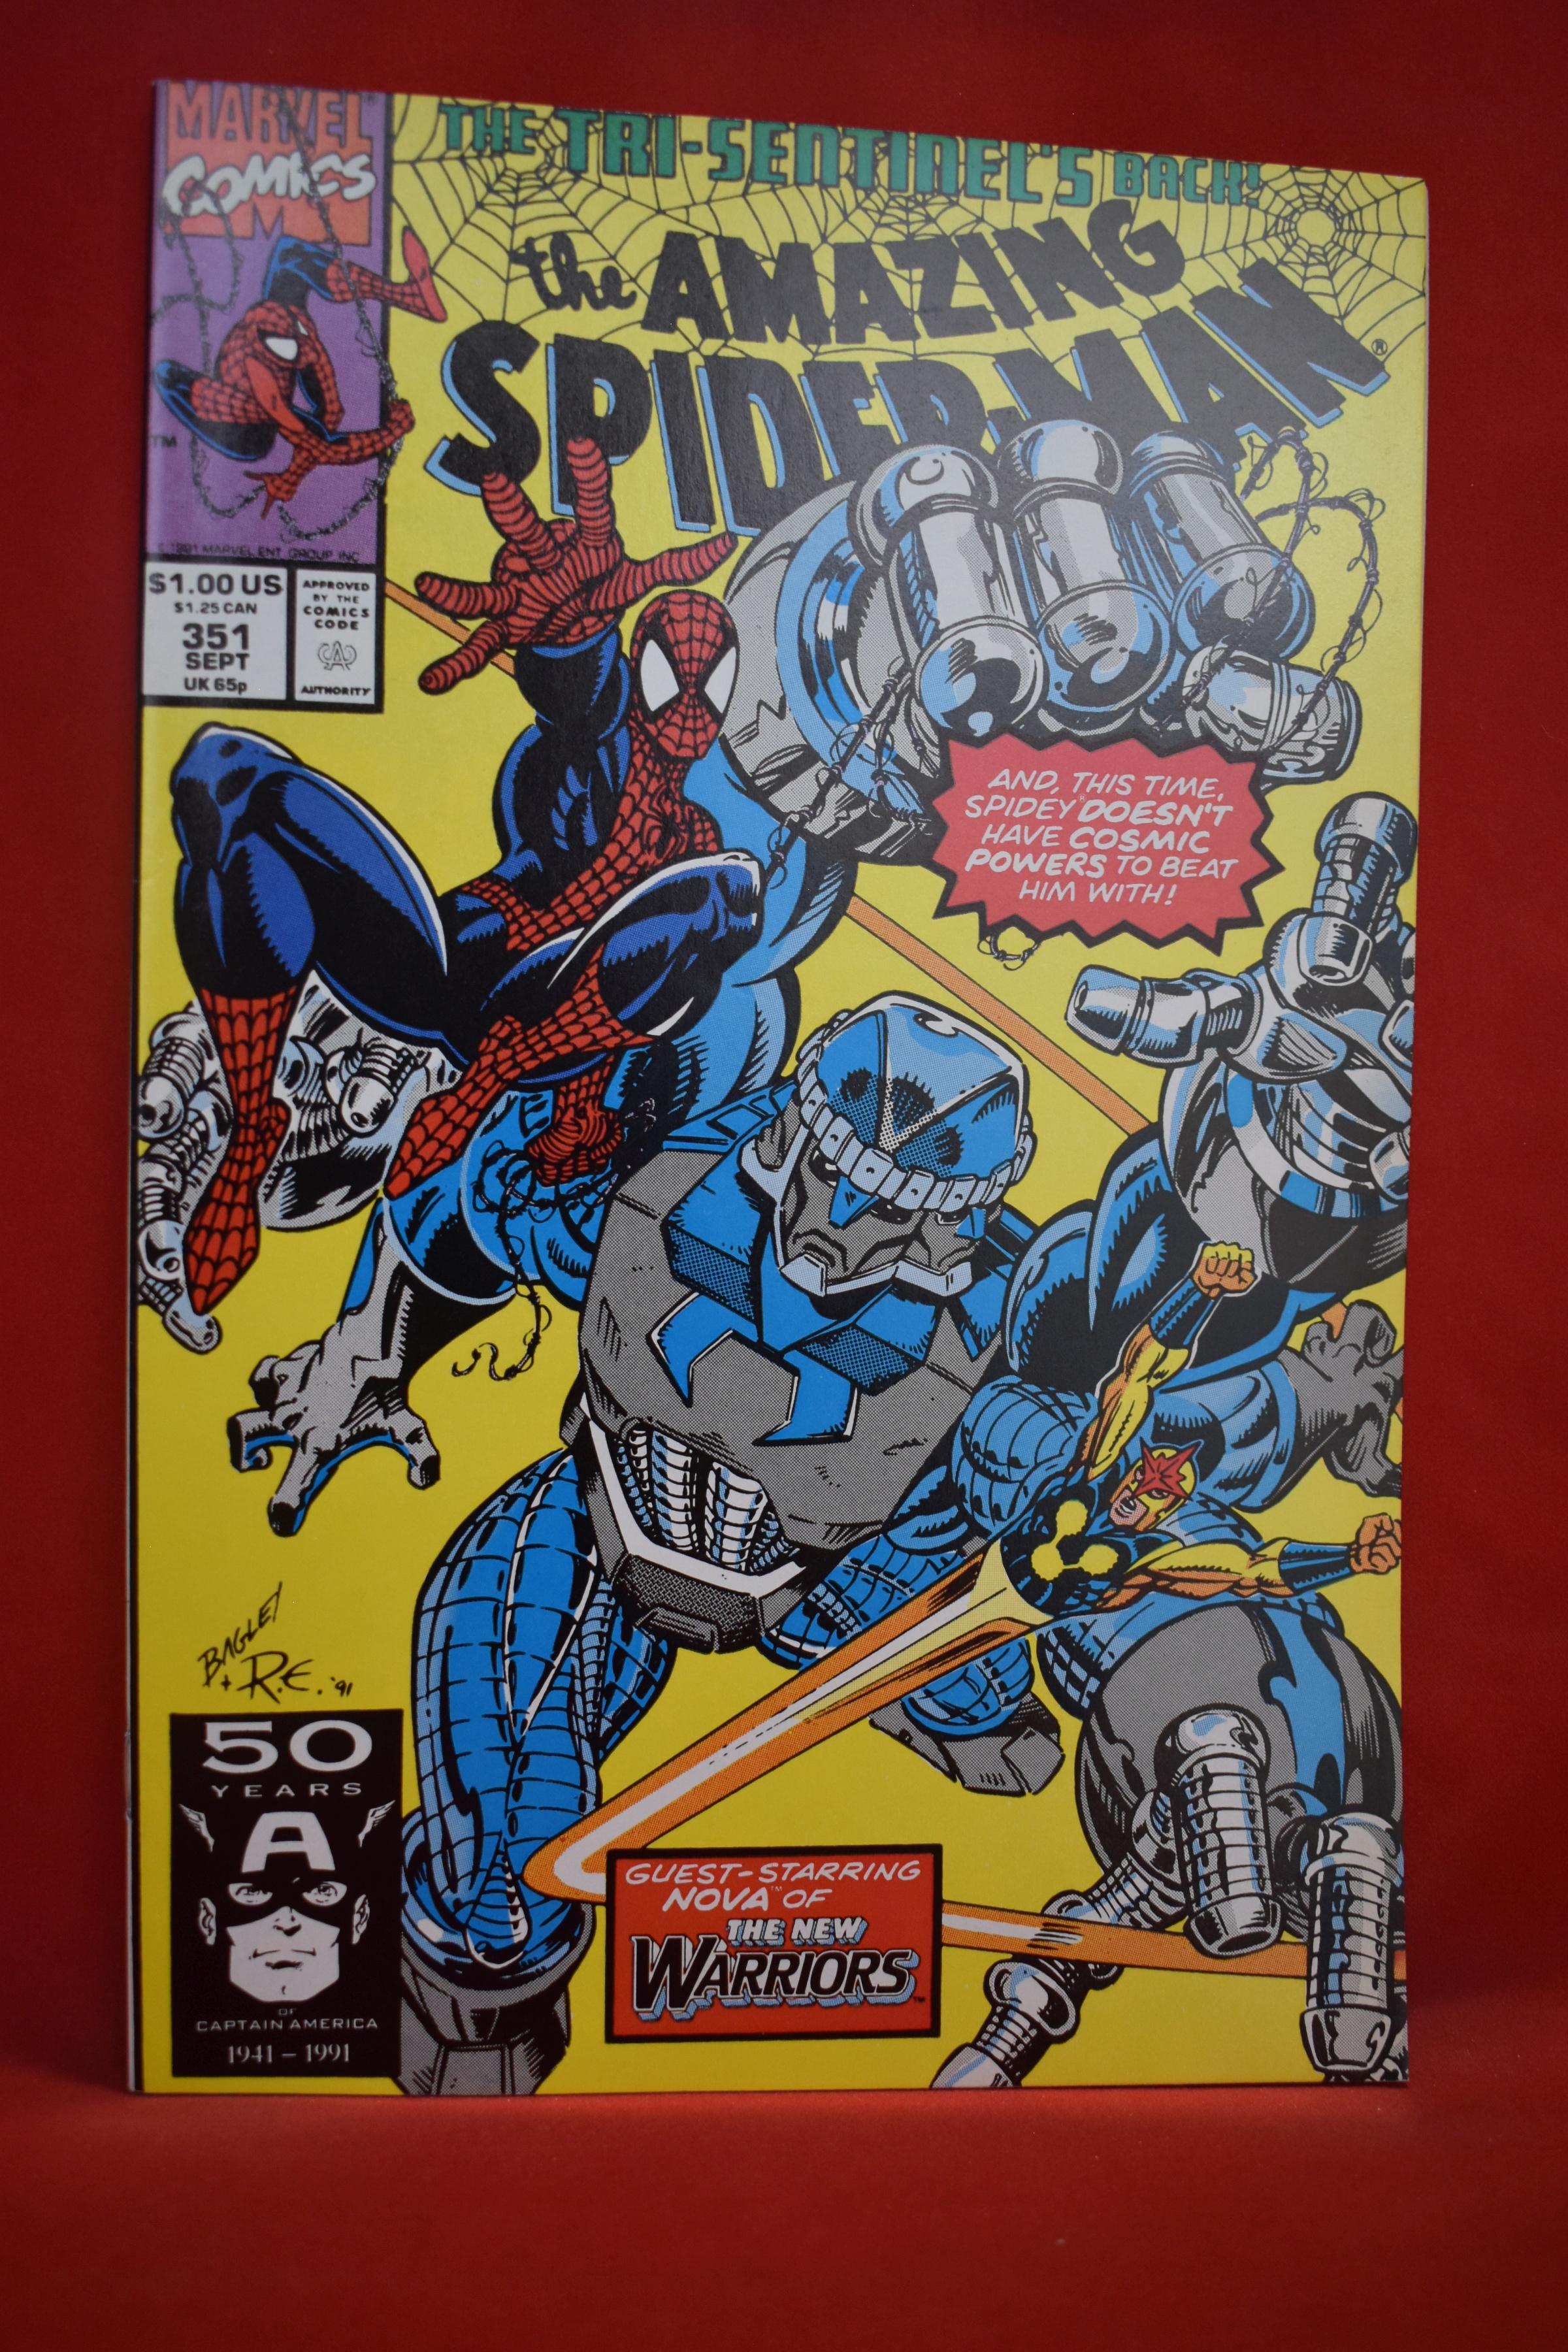 AMAZING SPIDERMAN #351 | THE THREE FACES OF EVIL! | MARK BAGLEY COVER ART